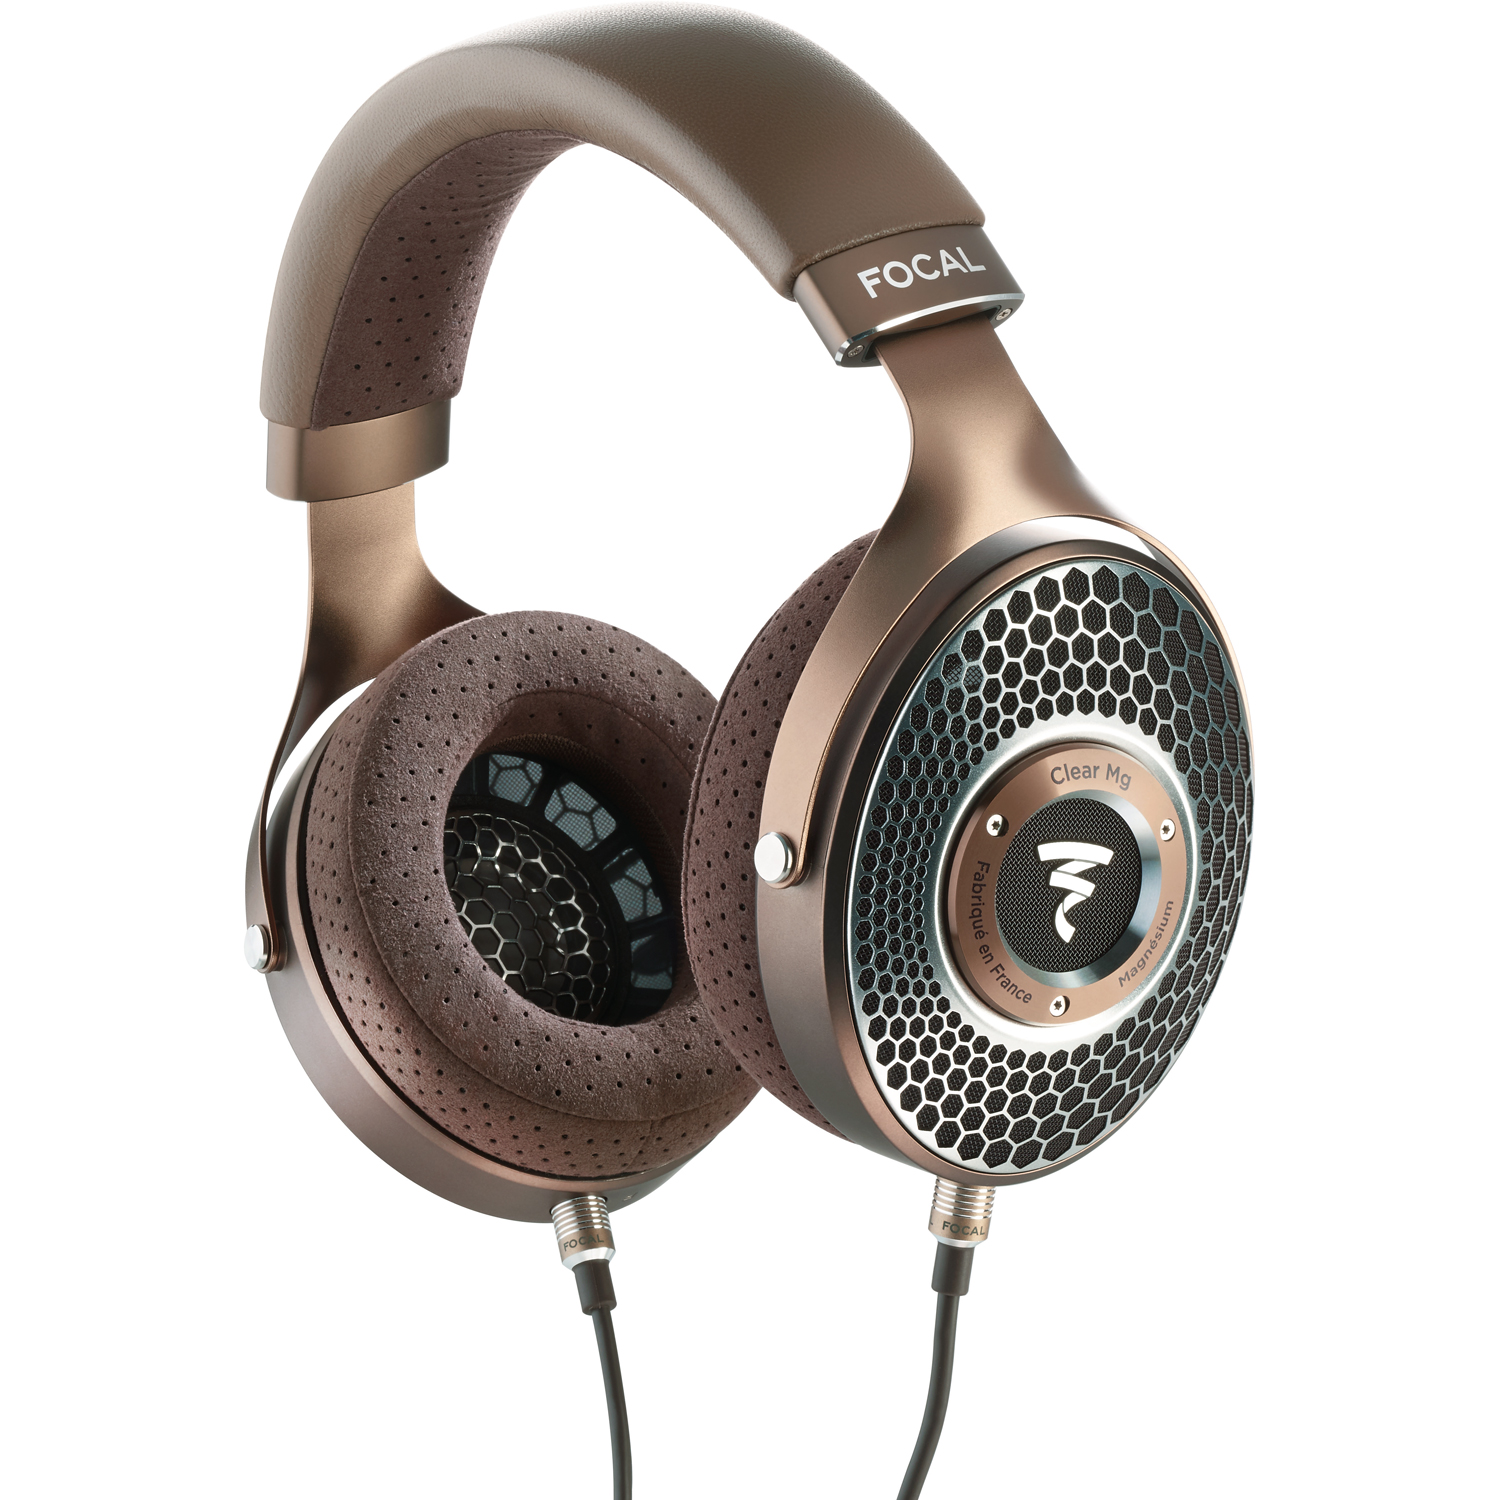 FOCAL Clear Mg Open-Back Over-Ear Wired Headphones